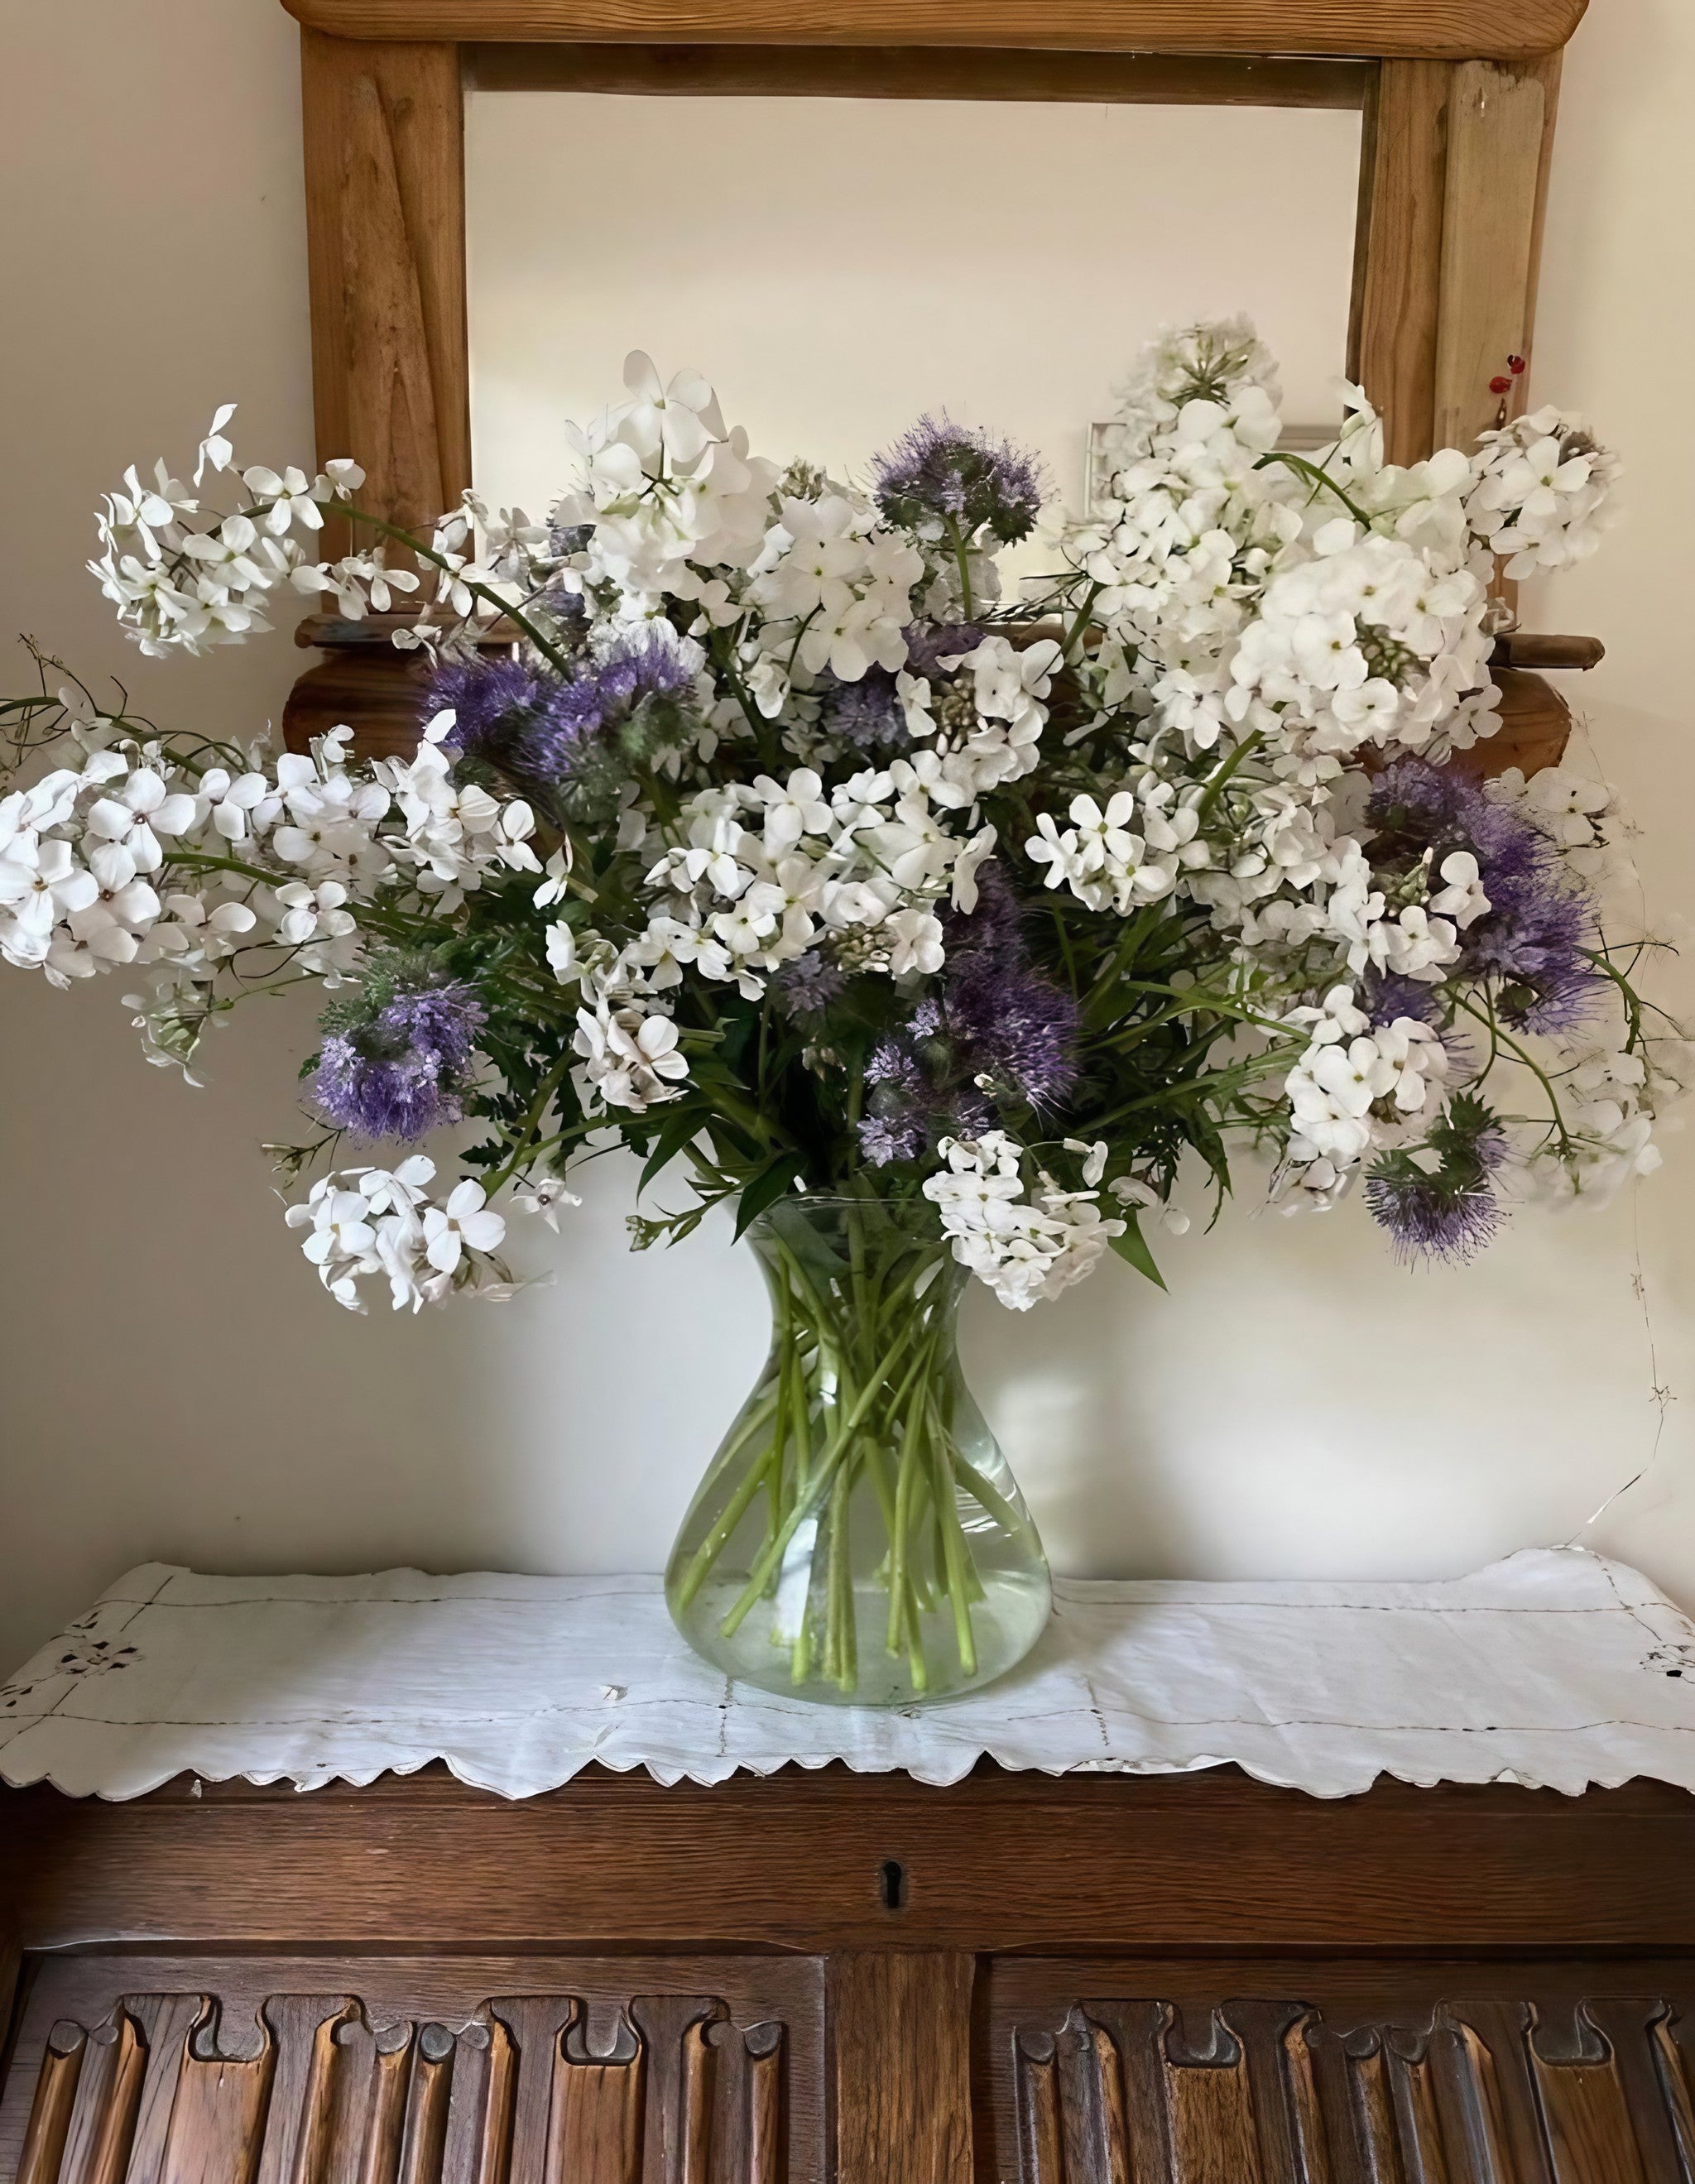 Tabletop display featuring a vase of Hesperis matronalis White and purple flowers